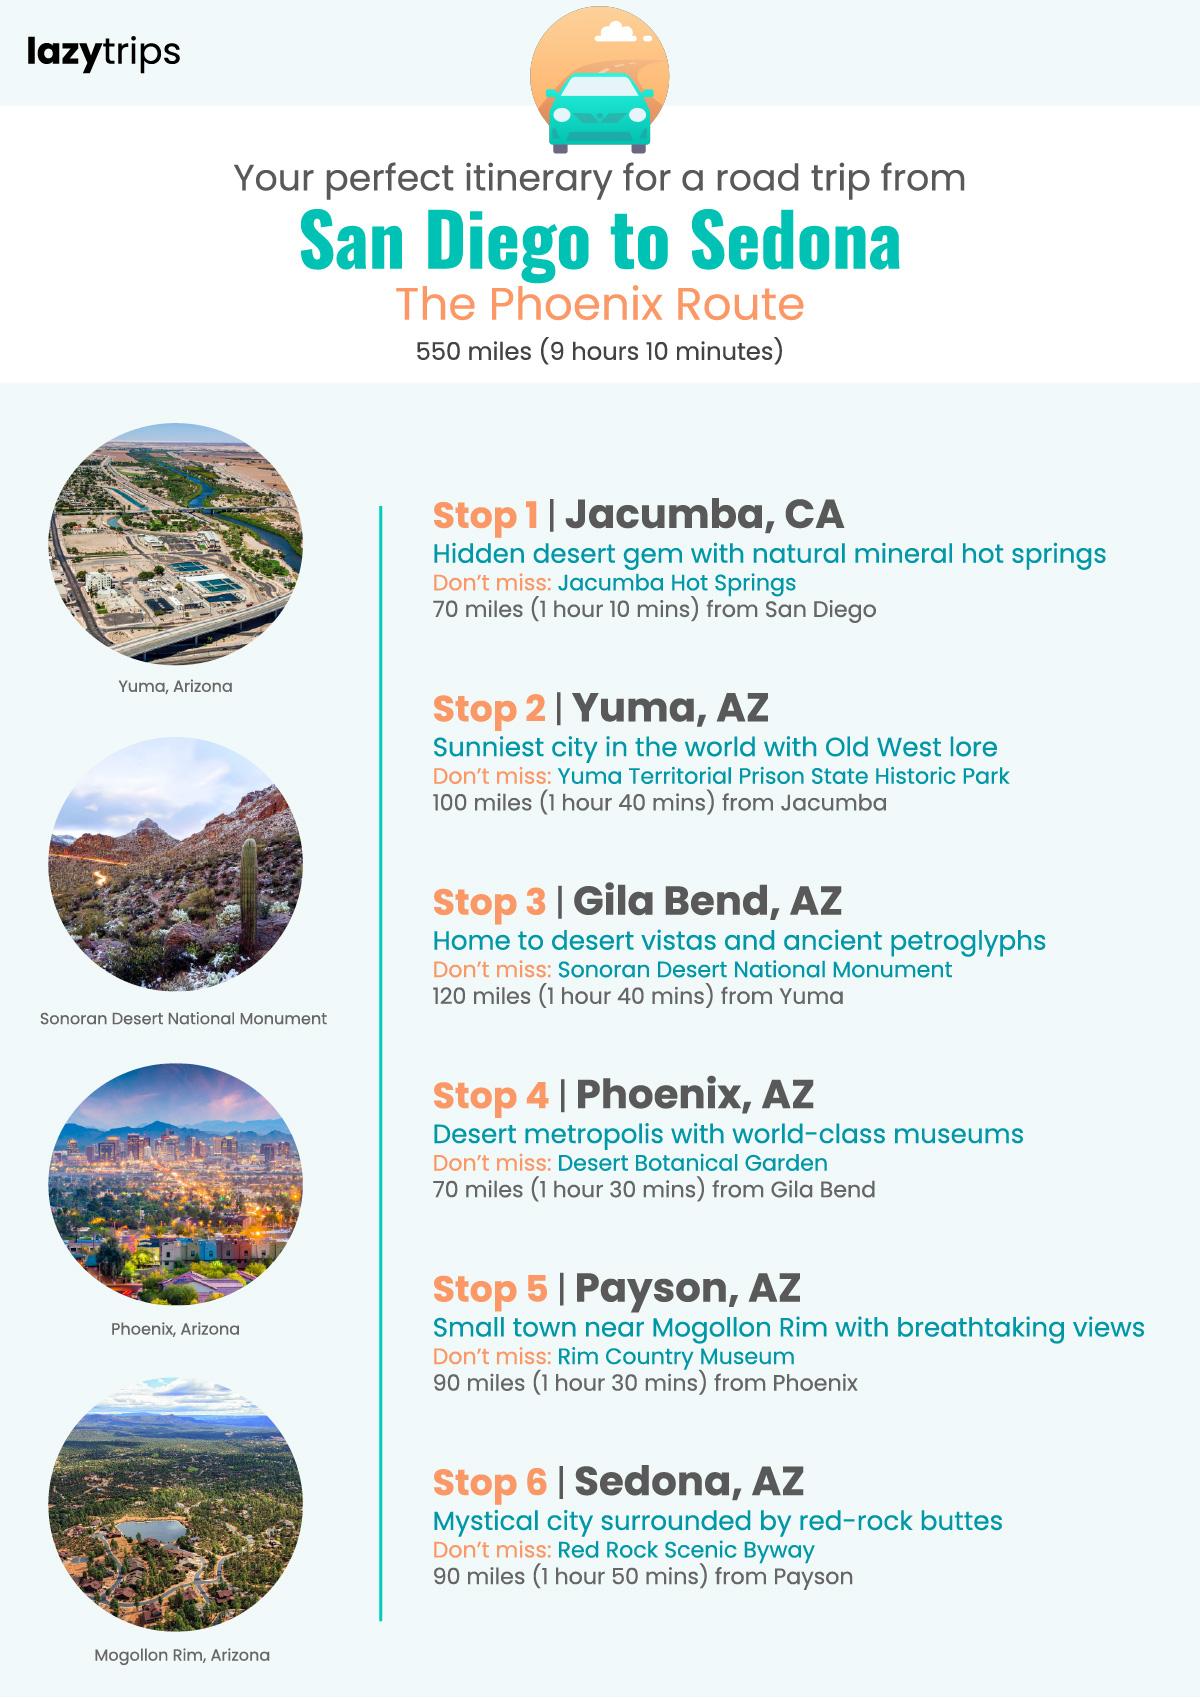 Itinerary for a road trip from San Diego to Sedona, stopping in Jacumba, Yuma, Gila Bend, Phoenix, Payson and Sedona